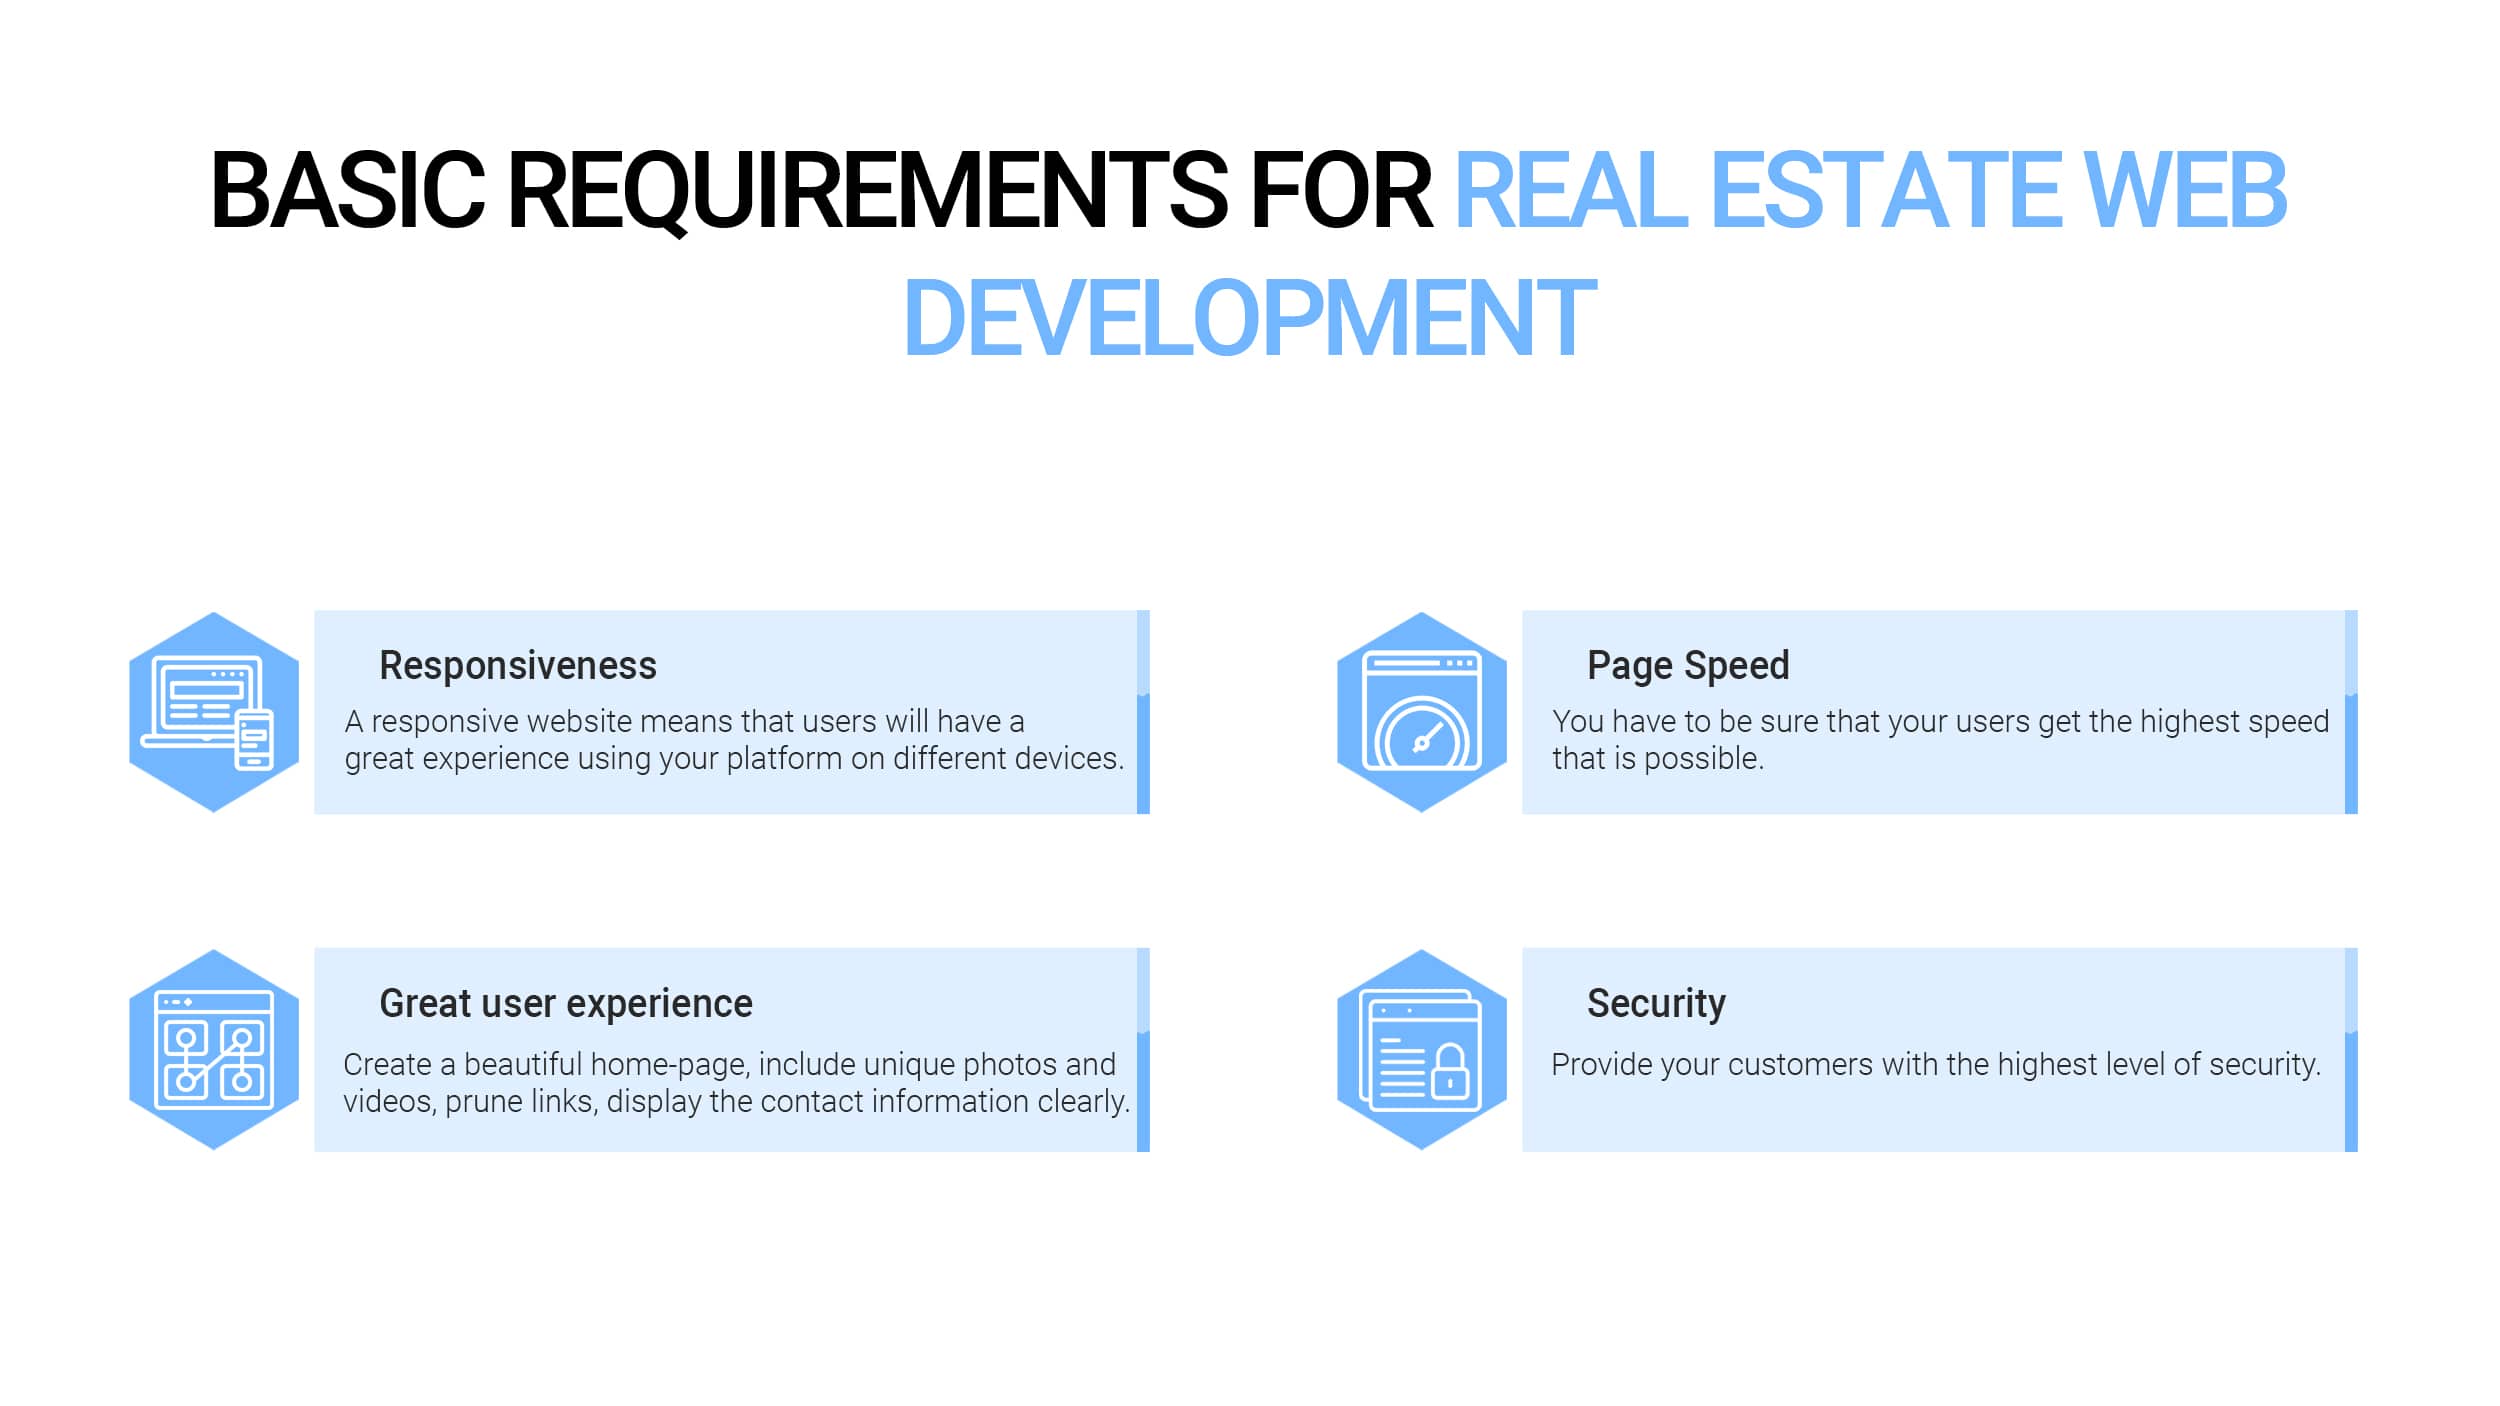 Real estate website requirements